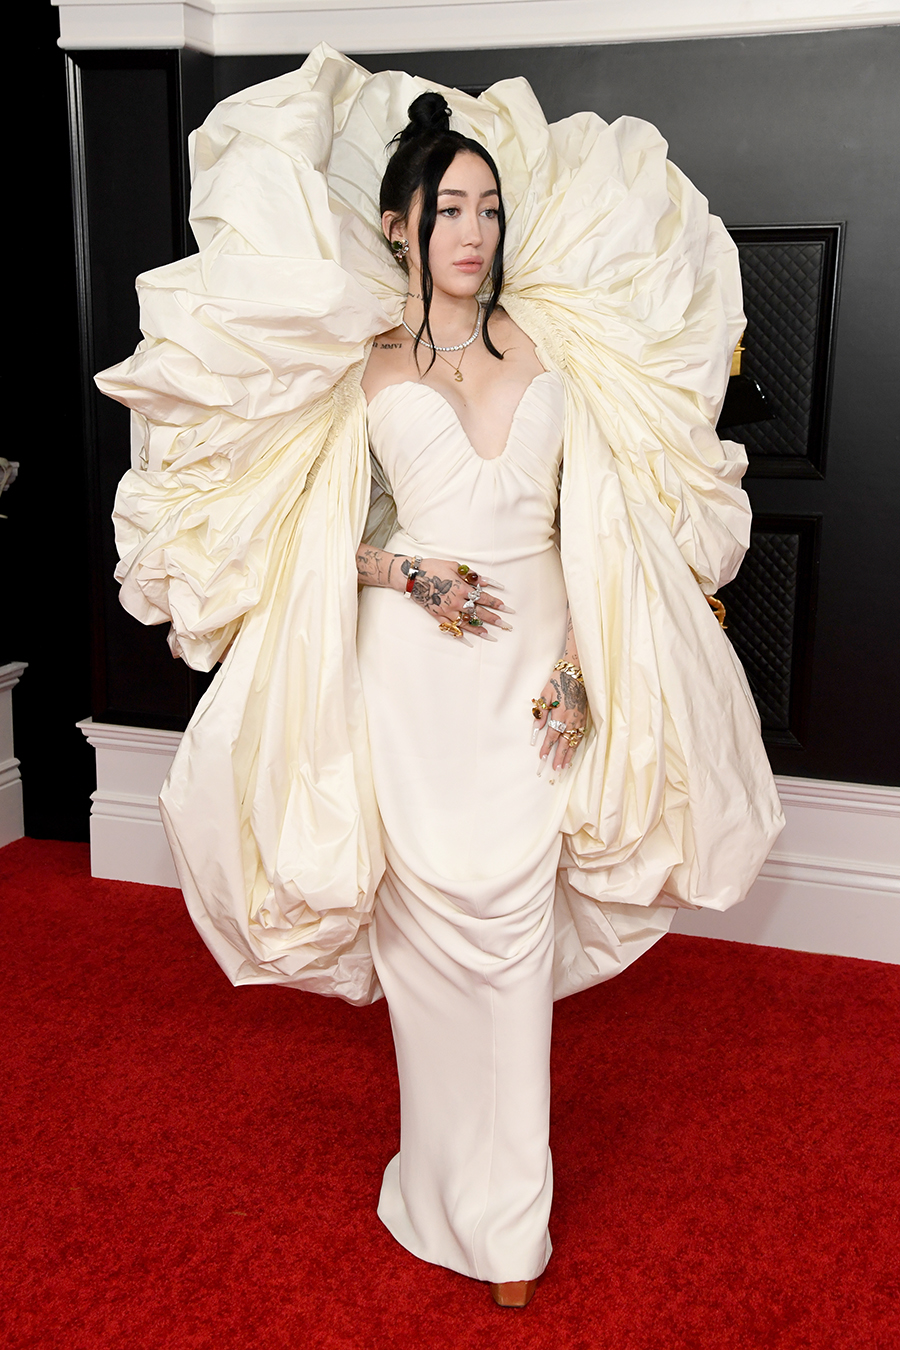 The most talked about outfits from the 2021 Grammys red carpet